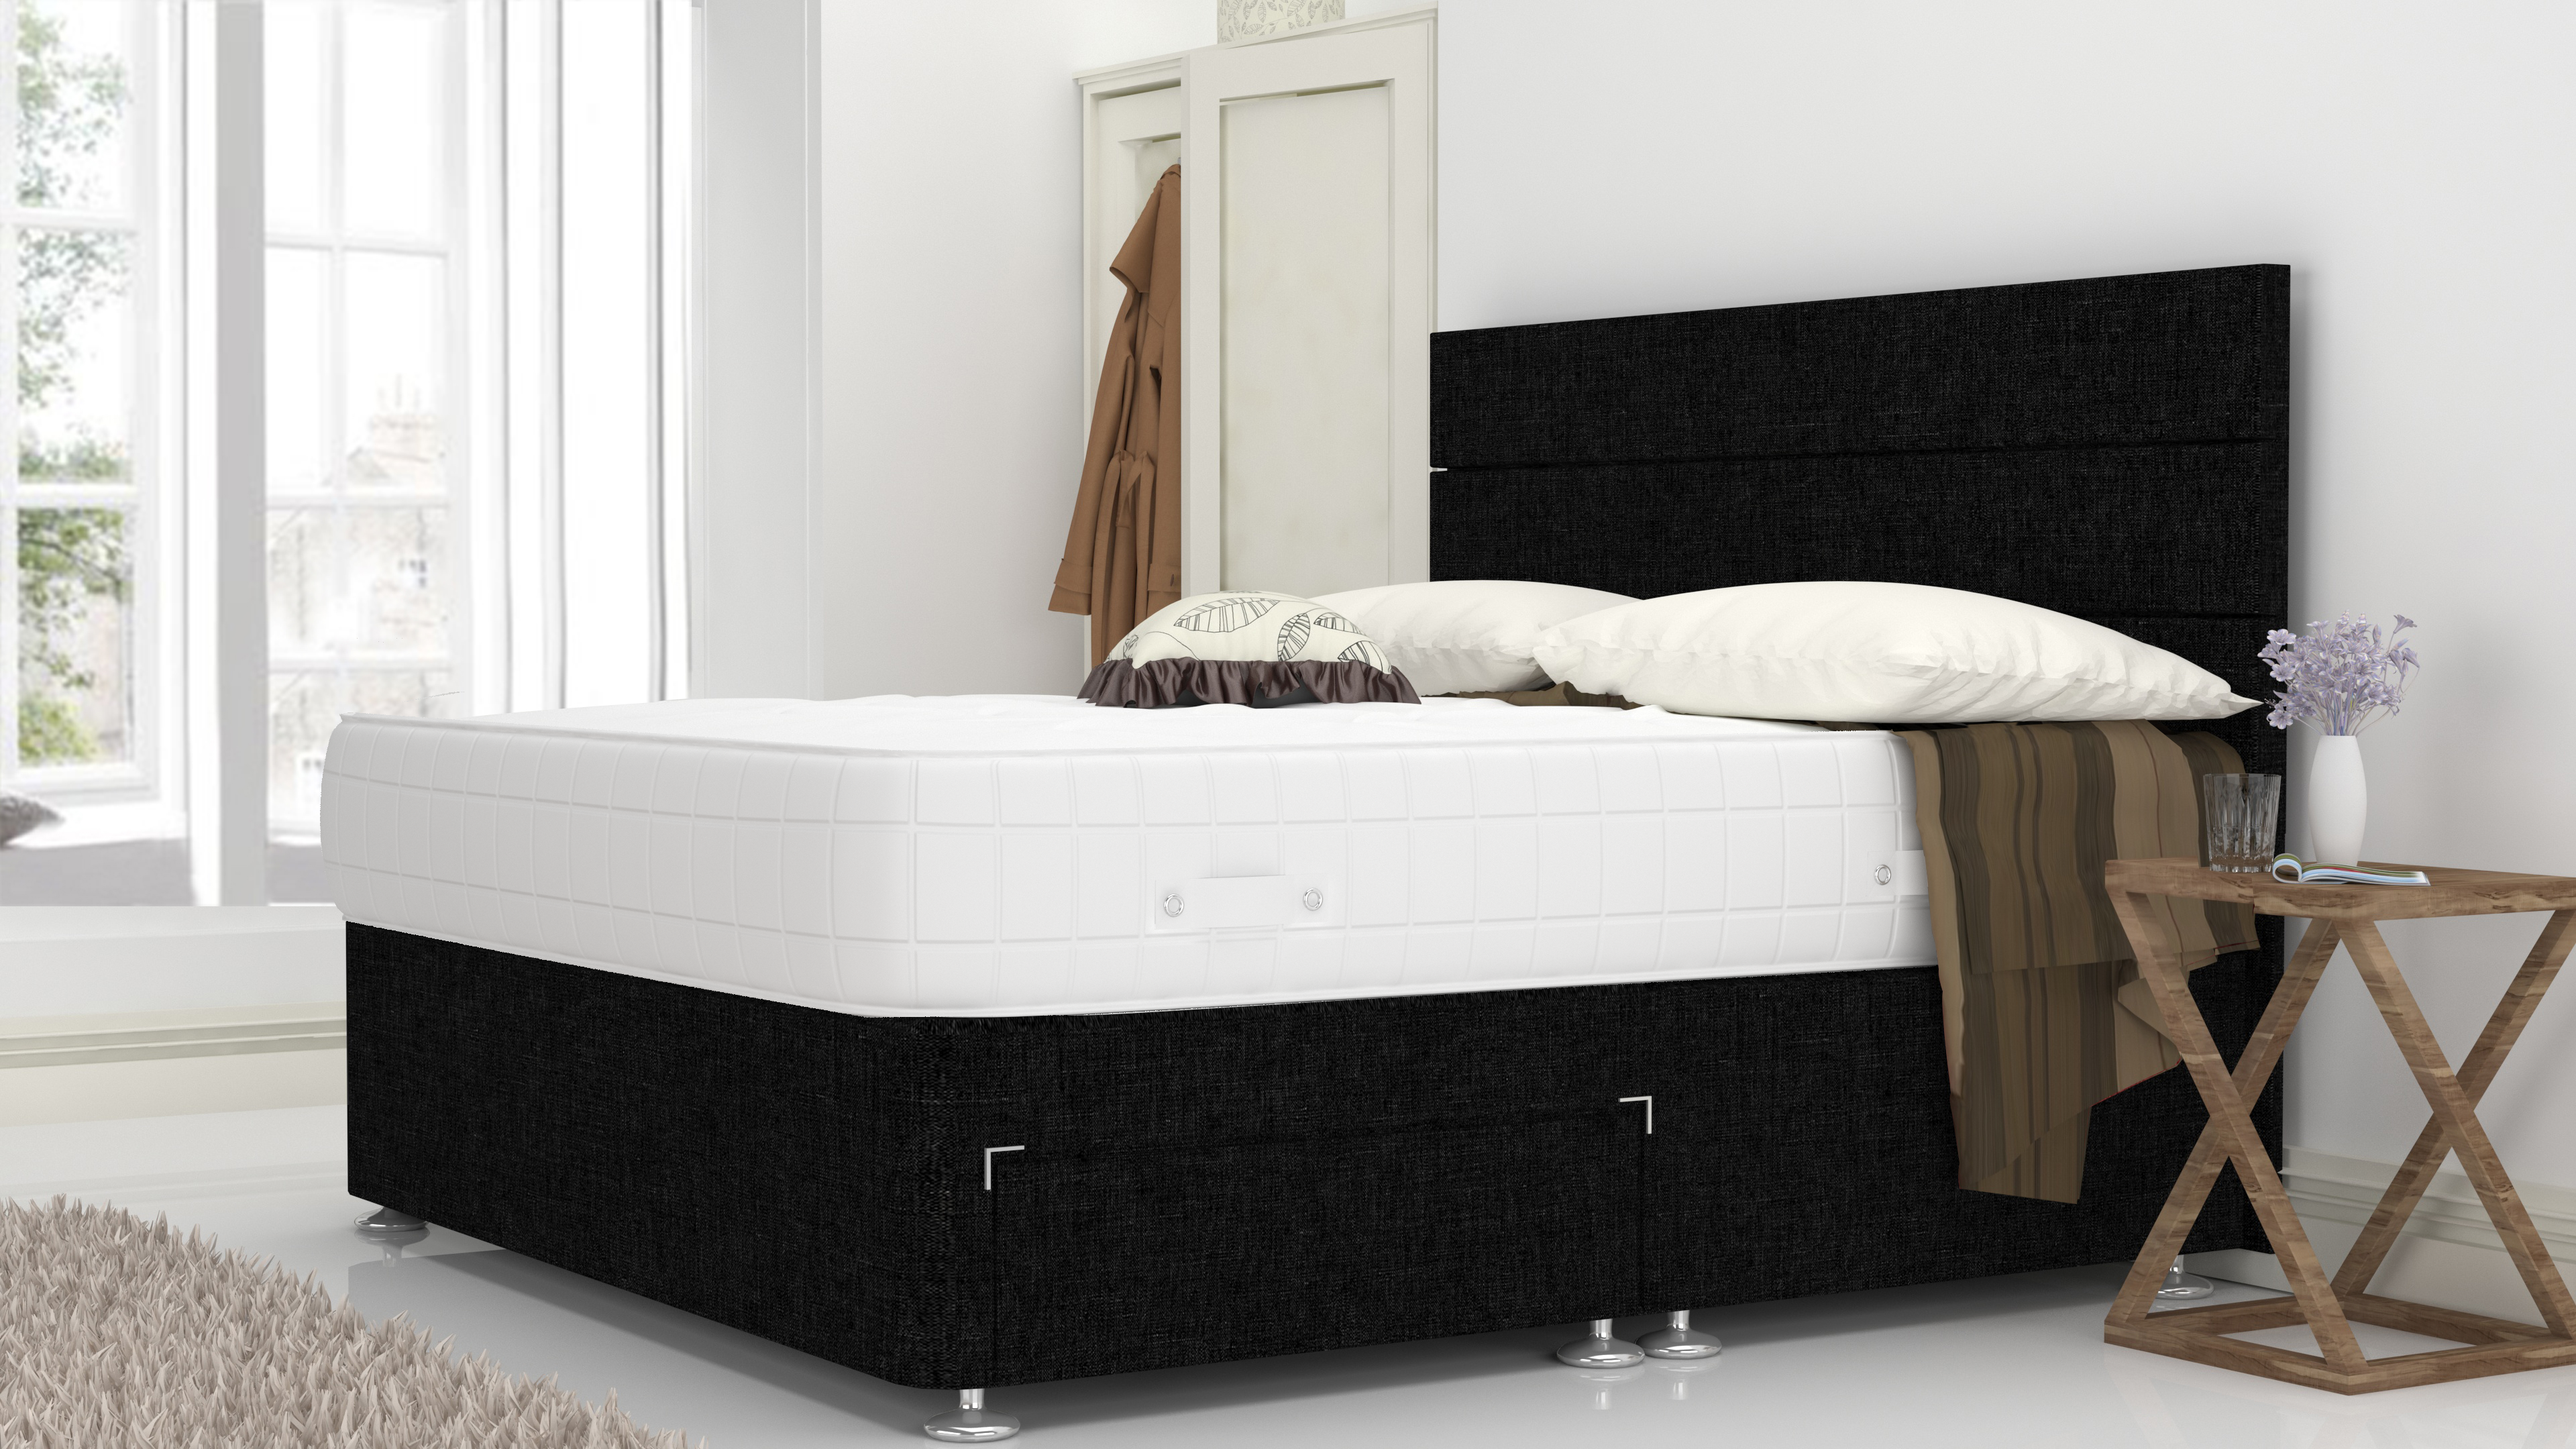 Black Venice 3 Feet Divan Bed Set With 3 Panel Headboard (Included Feet) And Free Pocket Sprung Mattress